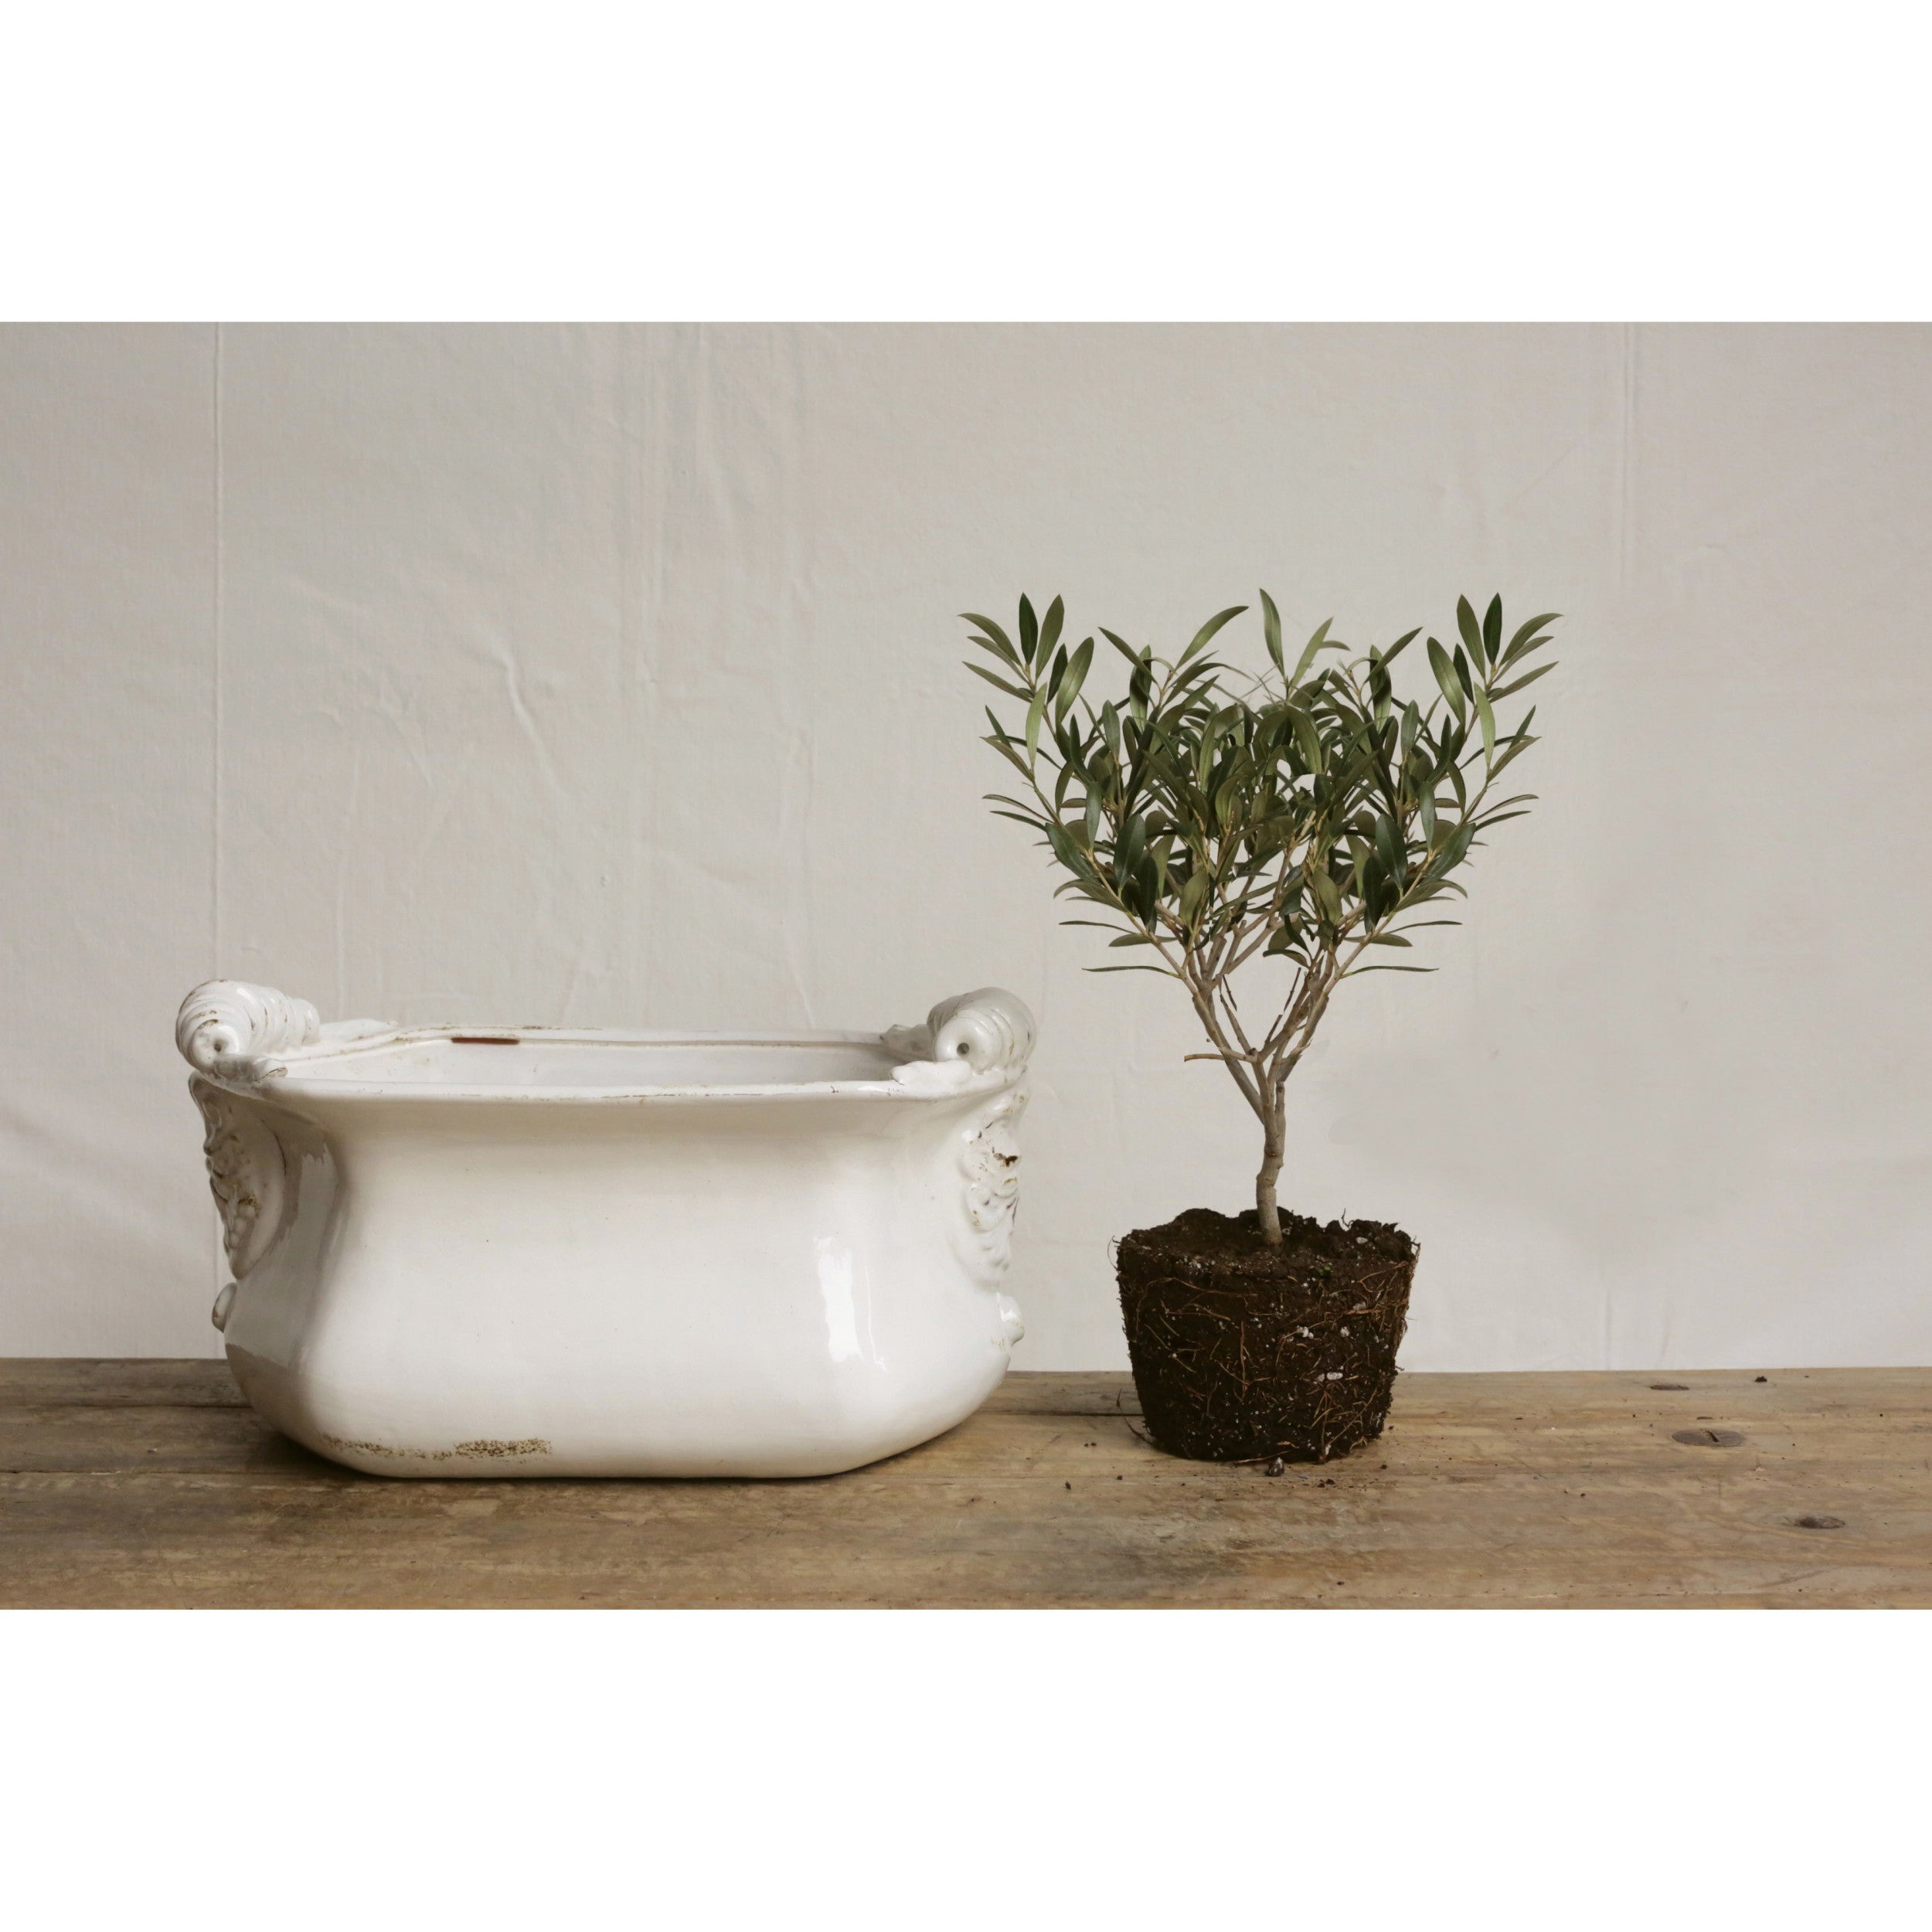 Vintage Inspired Cachepot on tabletop next to an olive branch tree. 